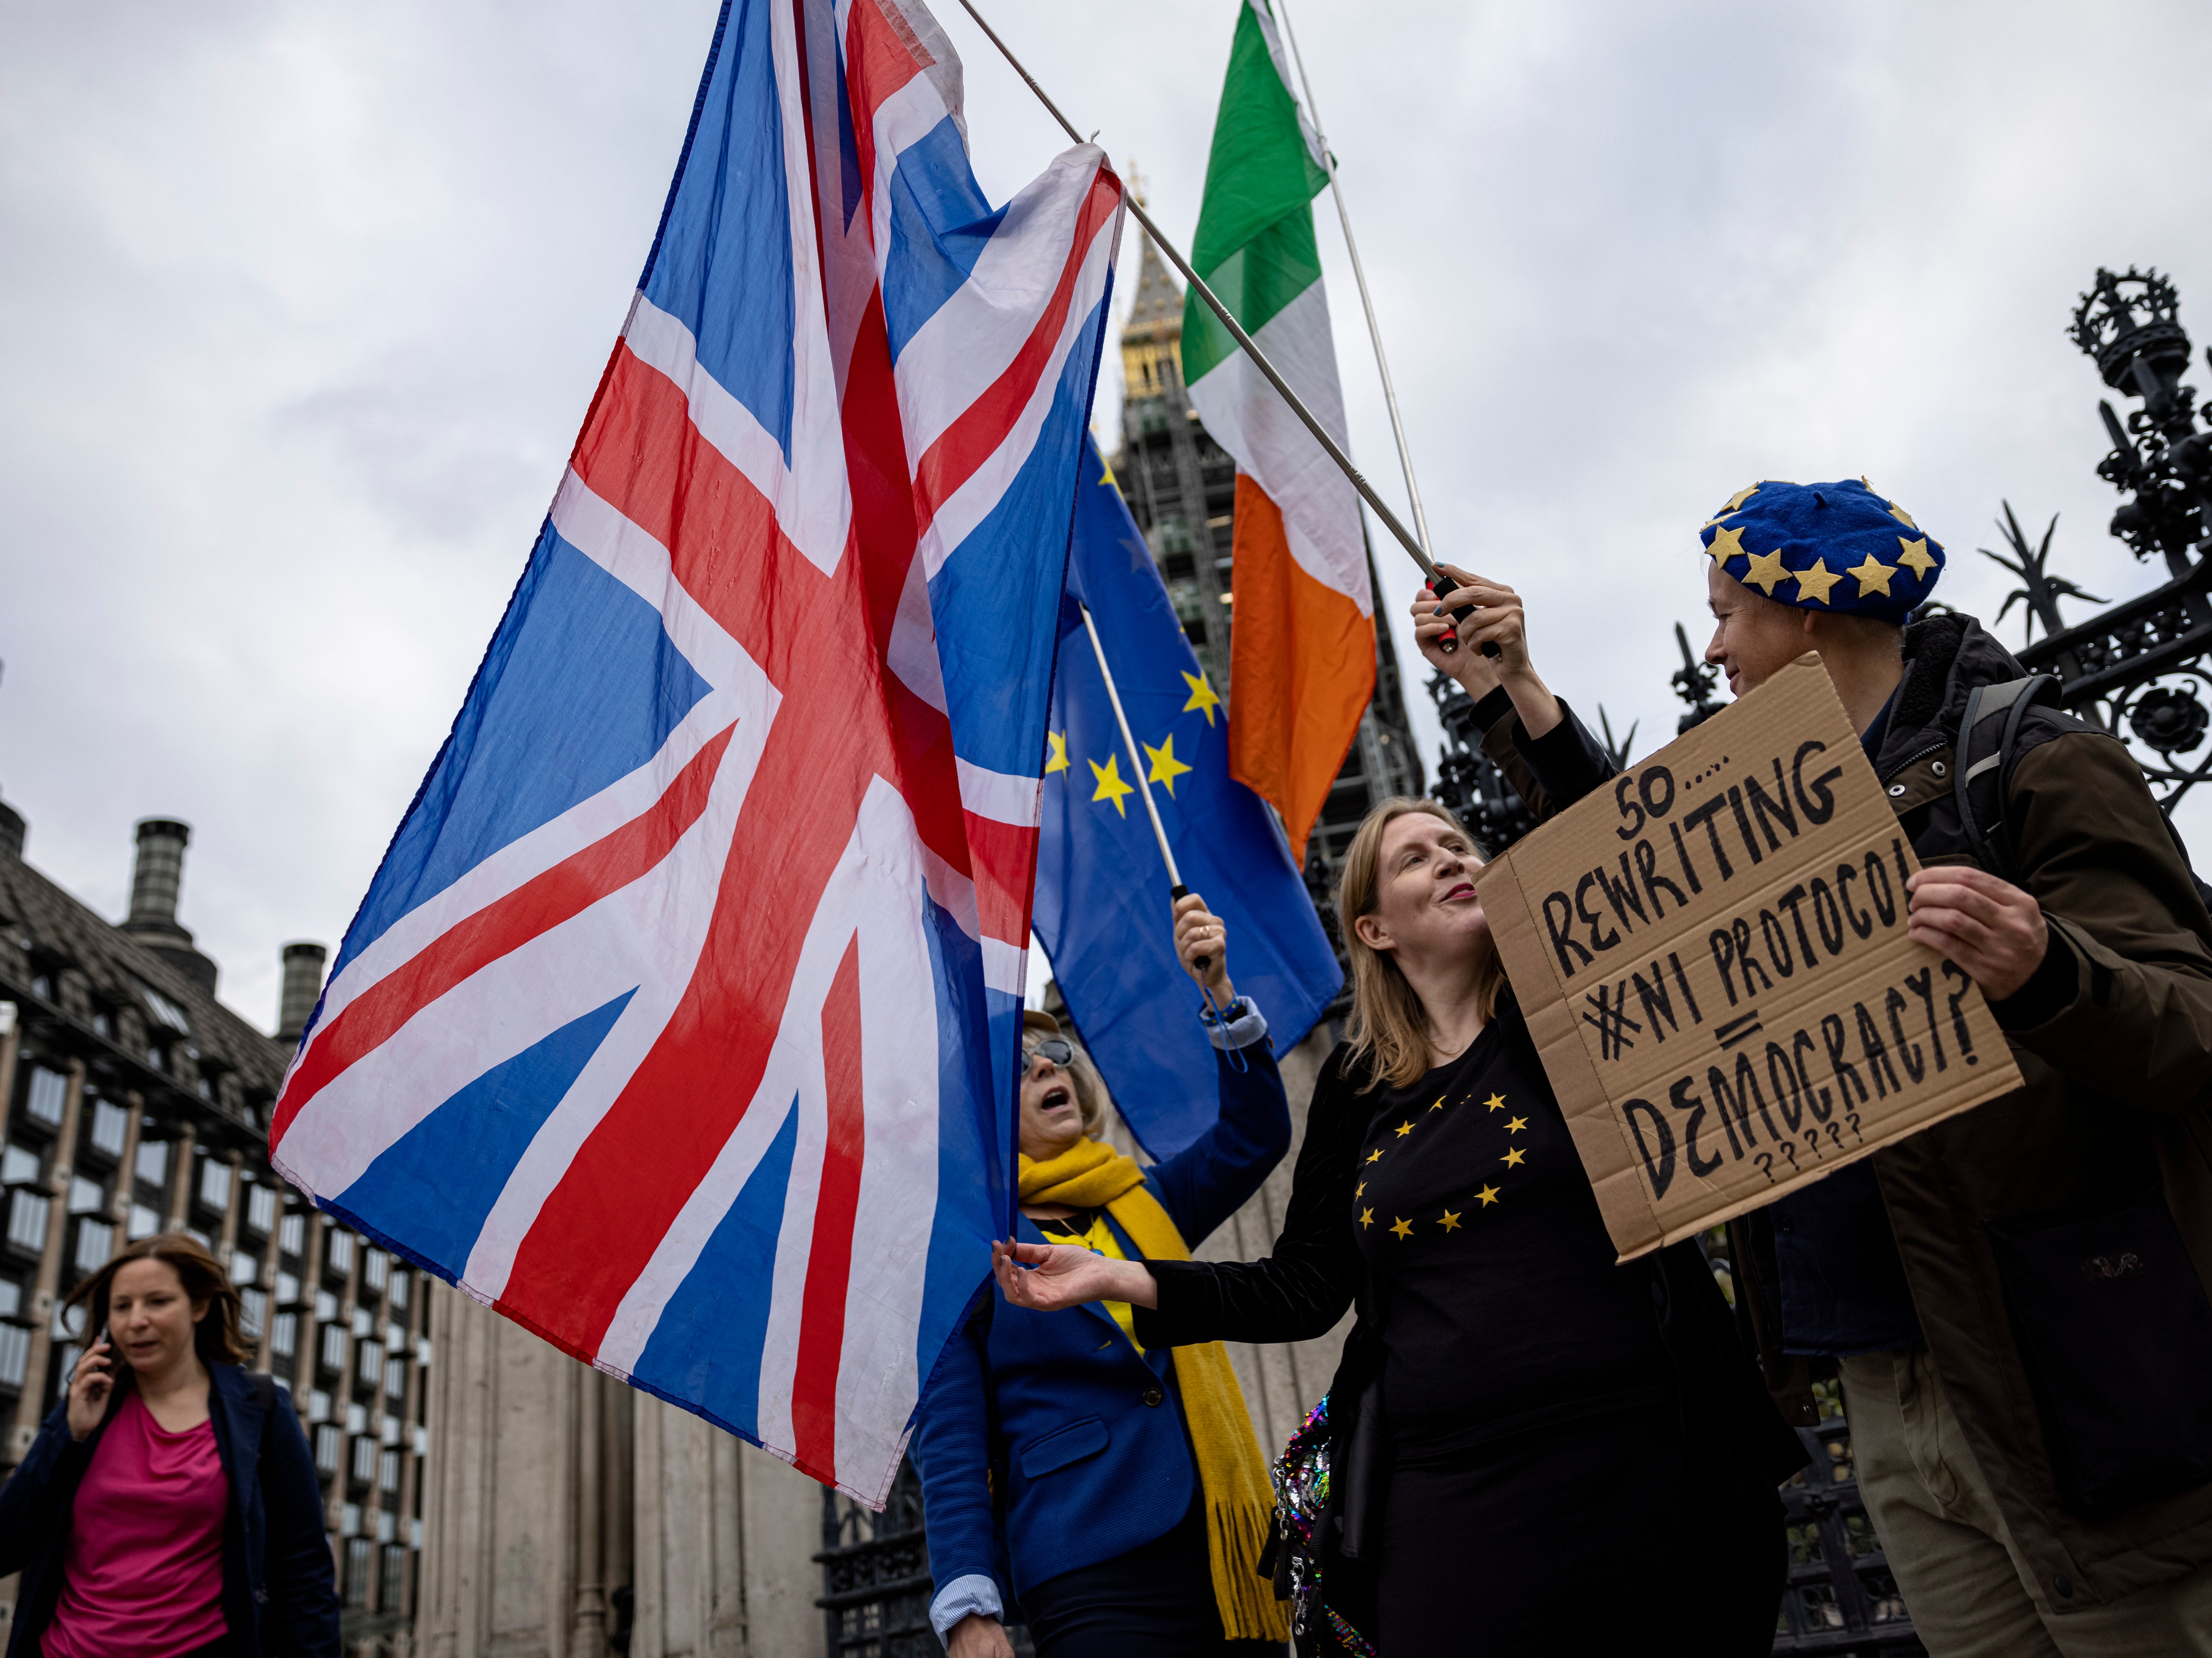 Anti-Brexit protesters wave the flags of the UK, Ireland and EU outside parliament